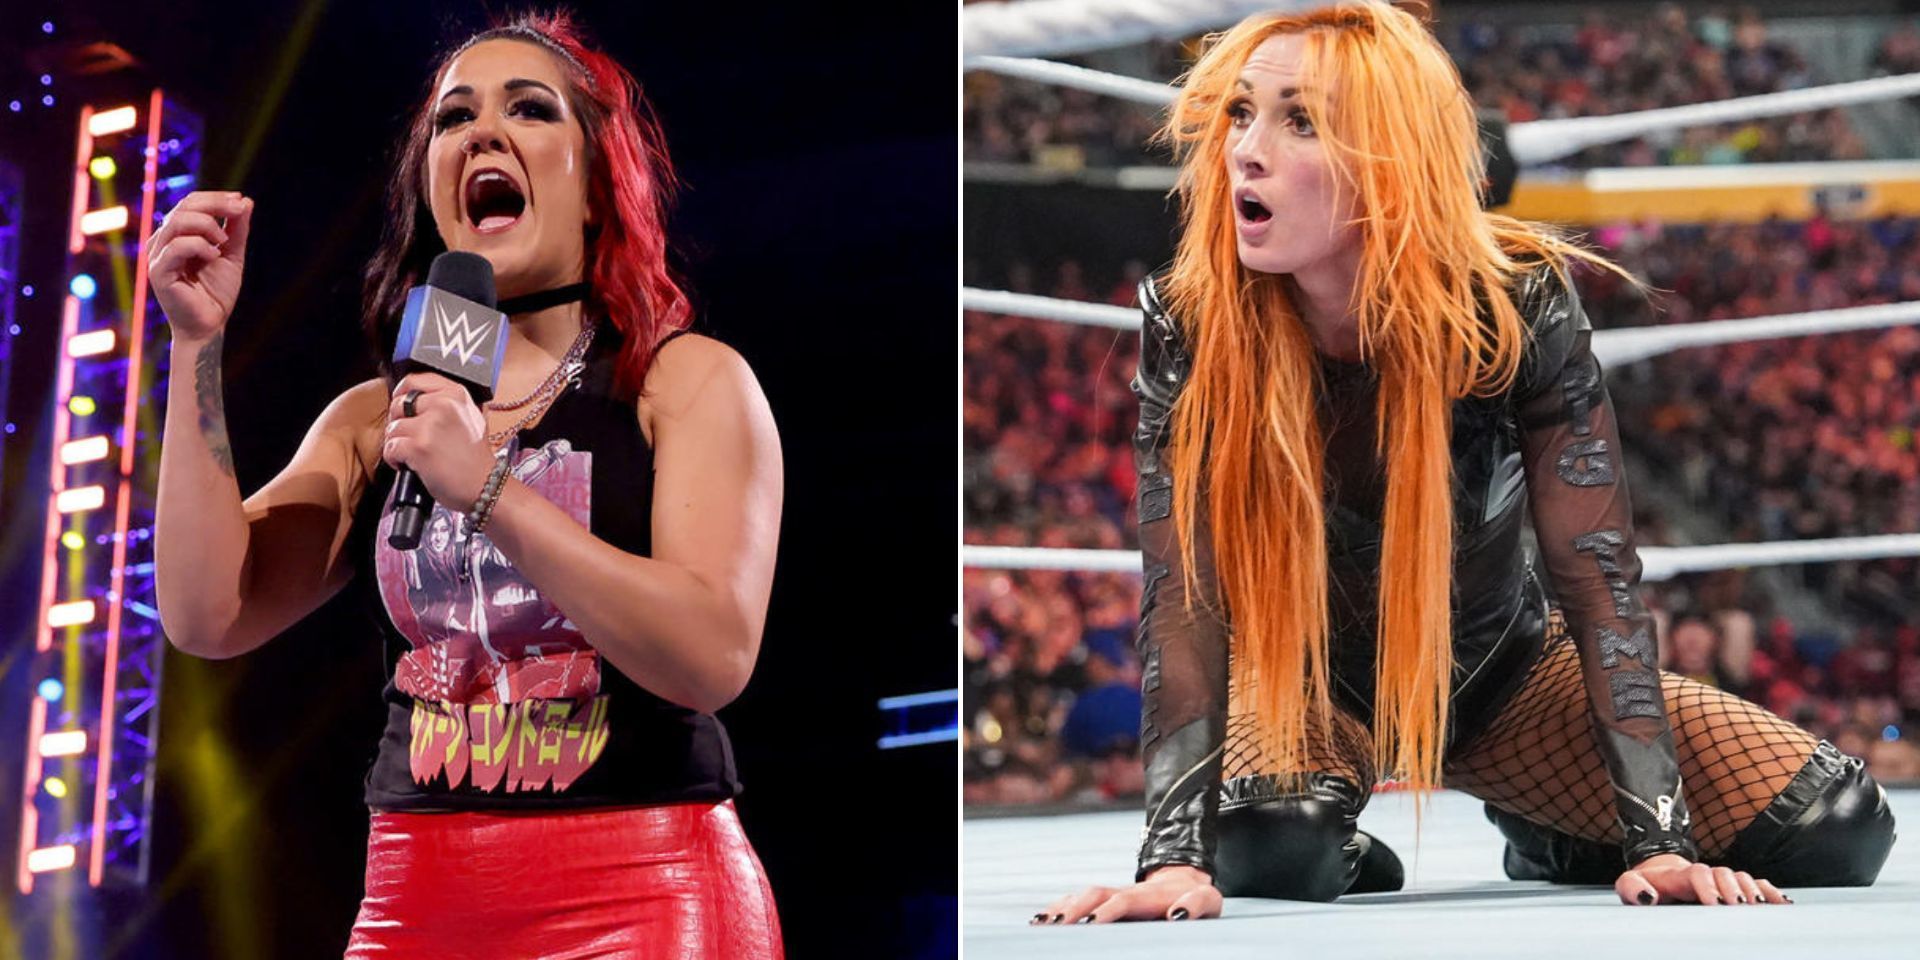 Bayley pinned Becky Lynch on WWE SmackDown